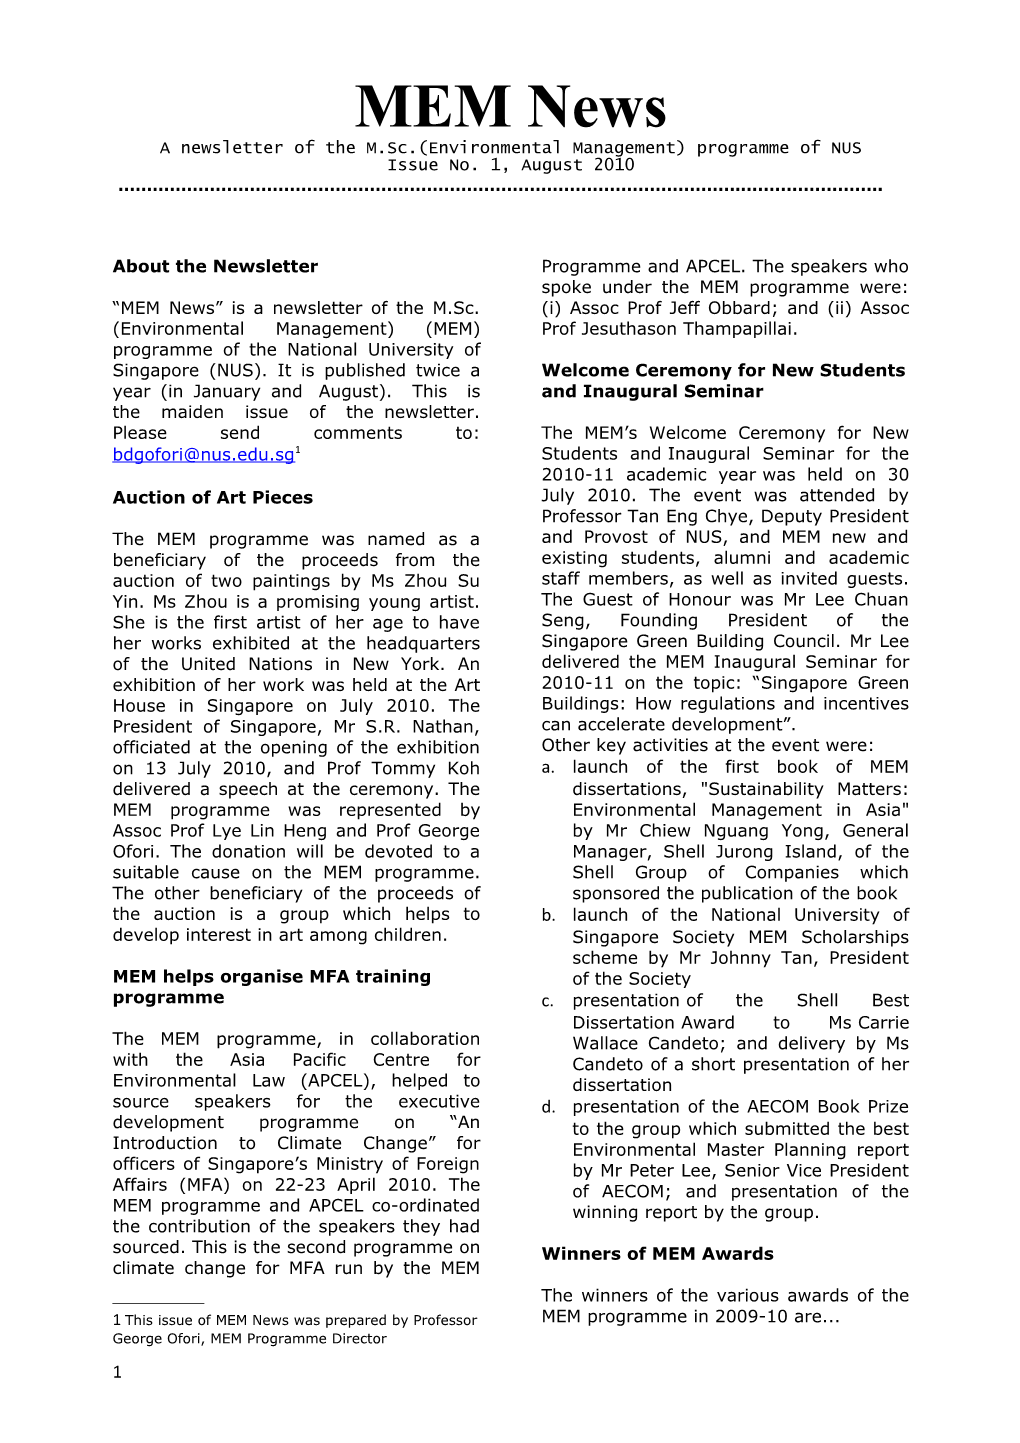 A Newsletter of the M.Sc.(Environmental Management) Programme of NUS